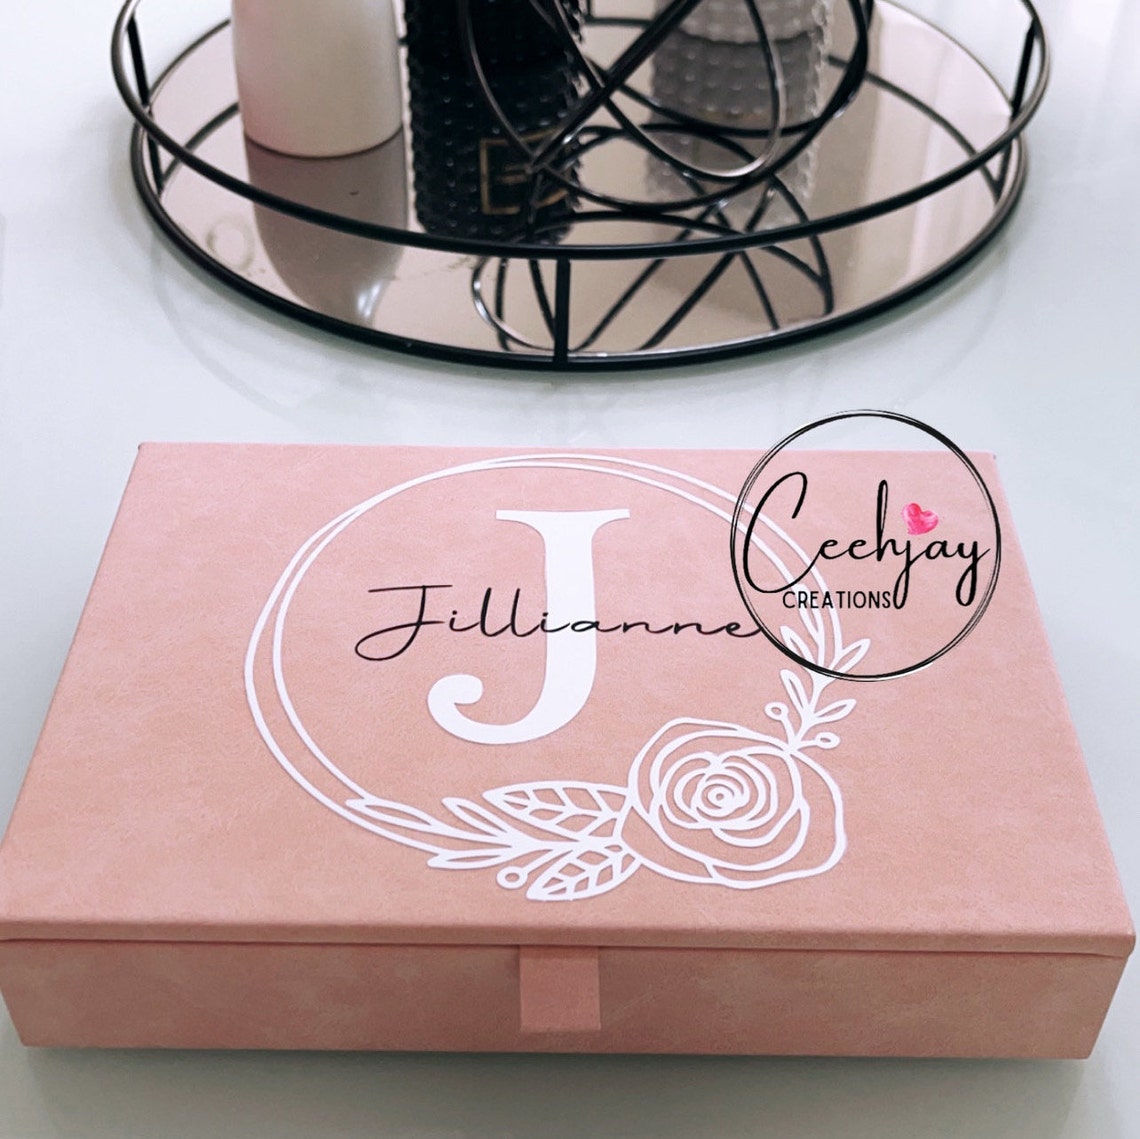 50 Gift Ideas for Mums | PERSONALISED JEWELLERY BOX | Beanstalk Mums